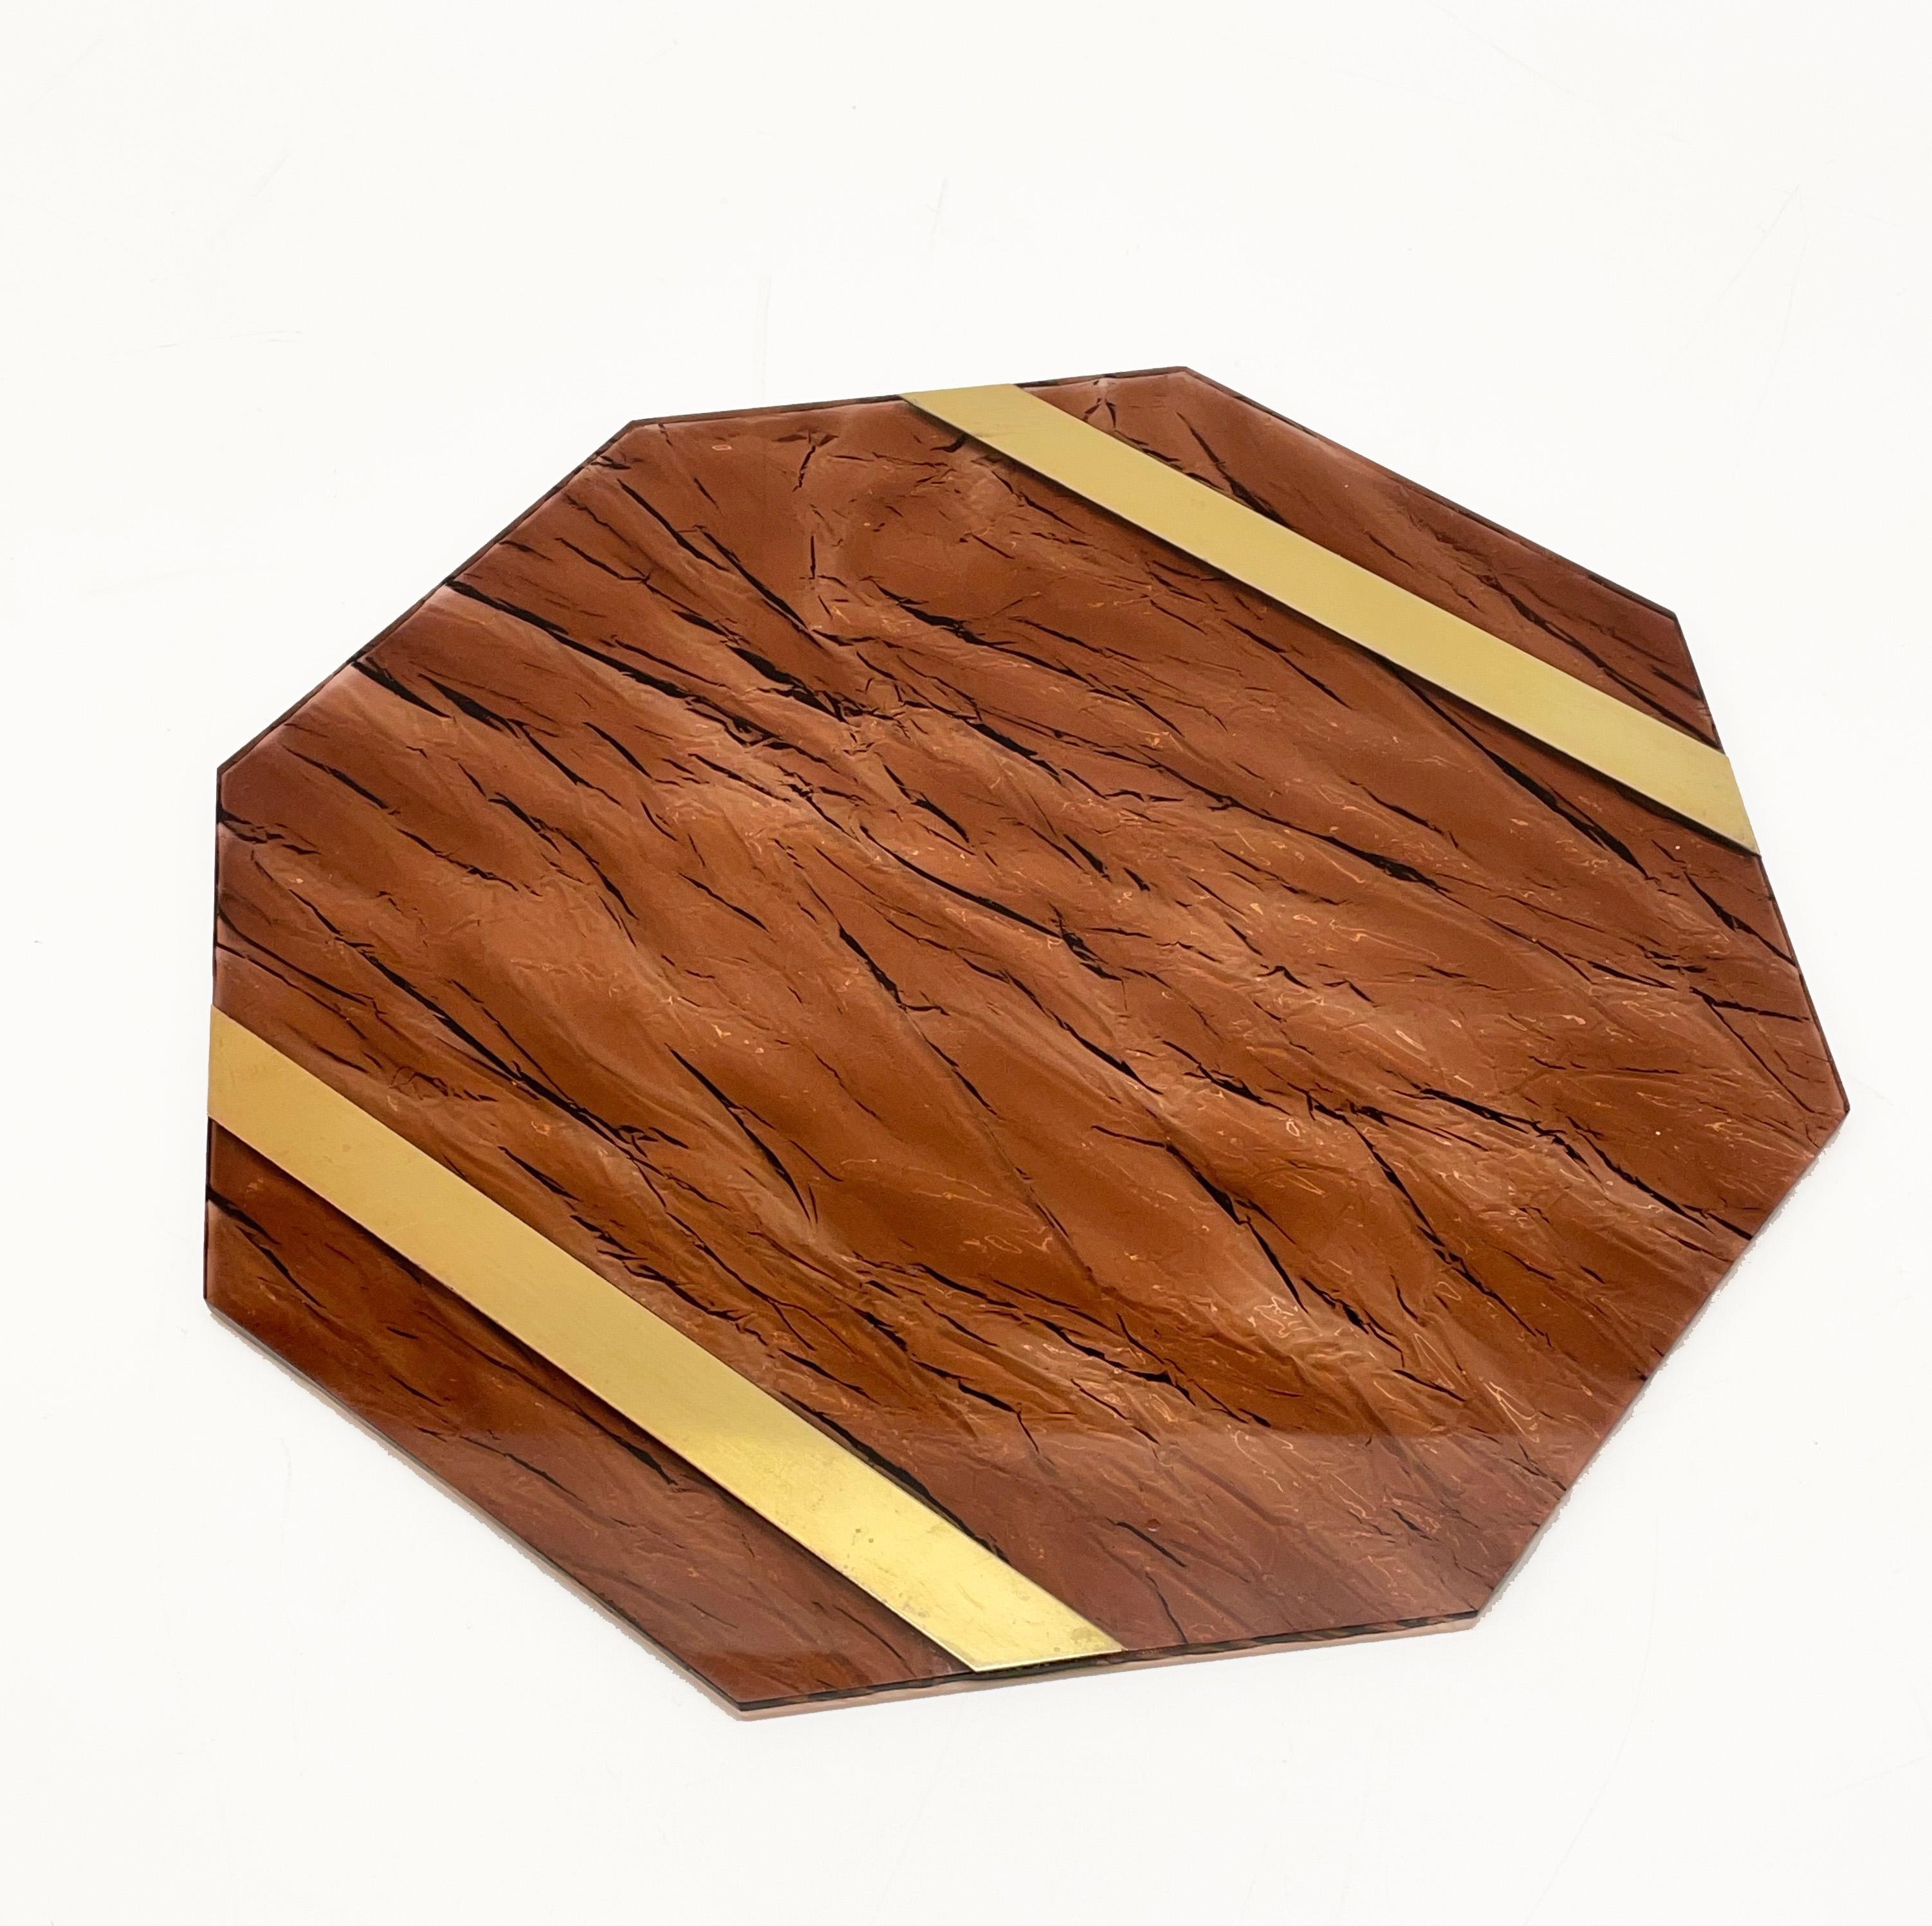 Octagonal placemat in plexiglass with smoked ice effect and brass. This piece was designed by Willy Rizzo in Italy during the 1970s.

This piece is made with two parallel brass bands in between tortoiseshell plexiglass elements.

This piece is